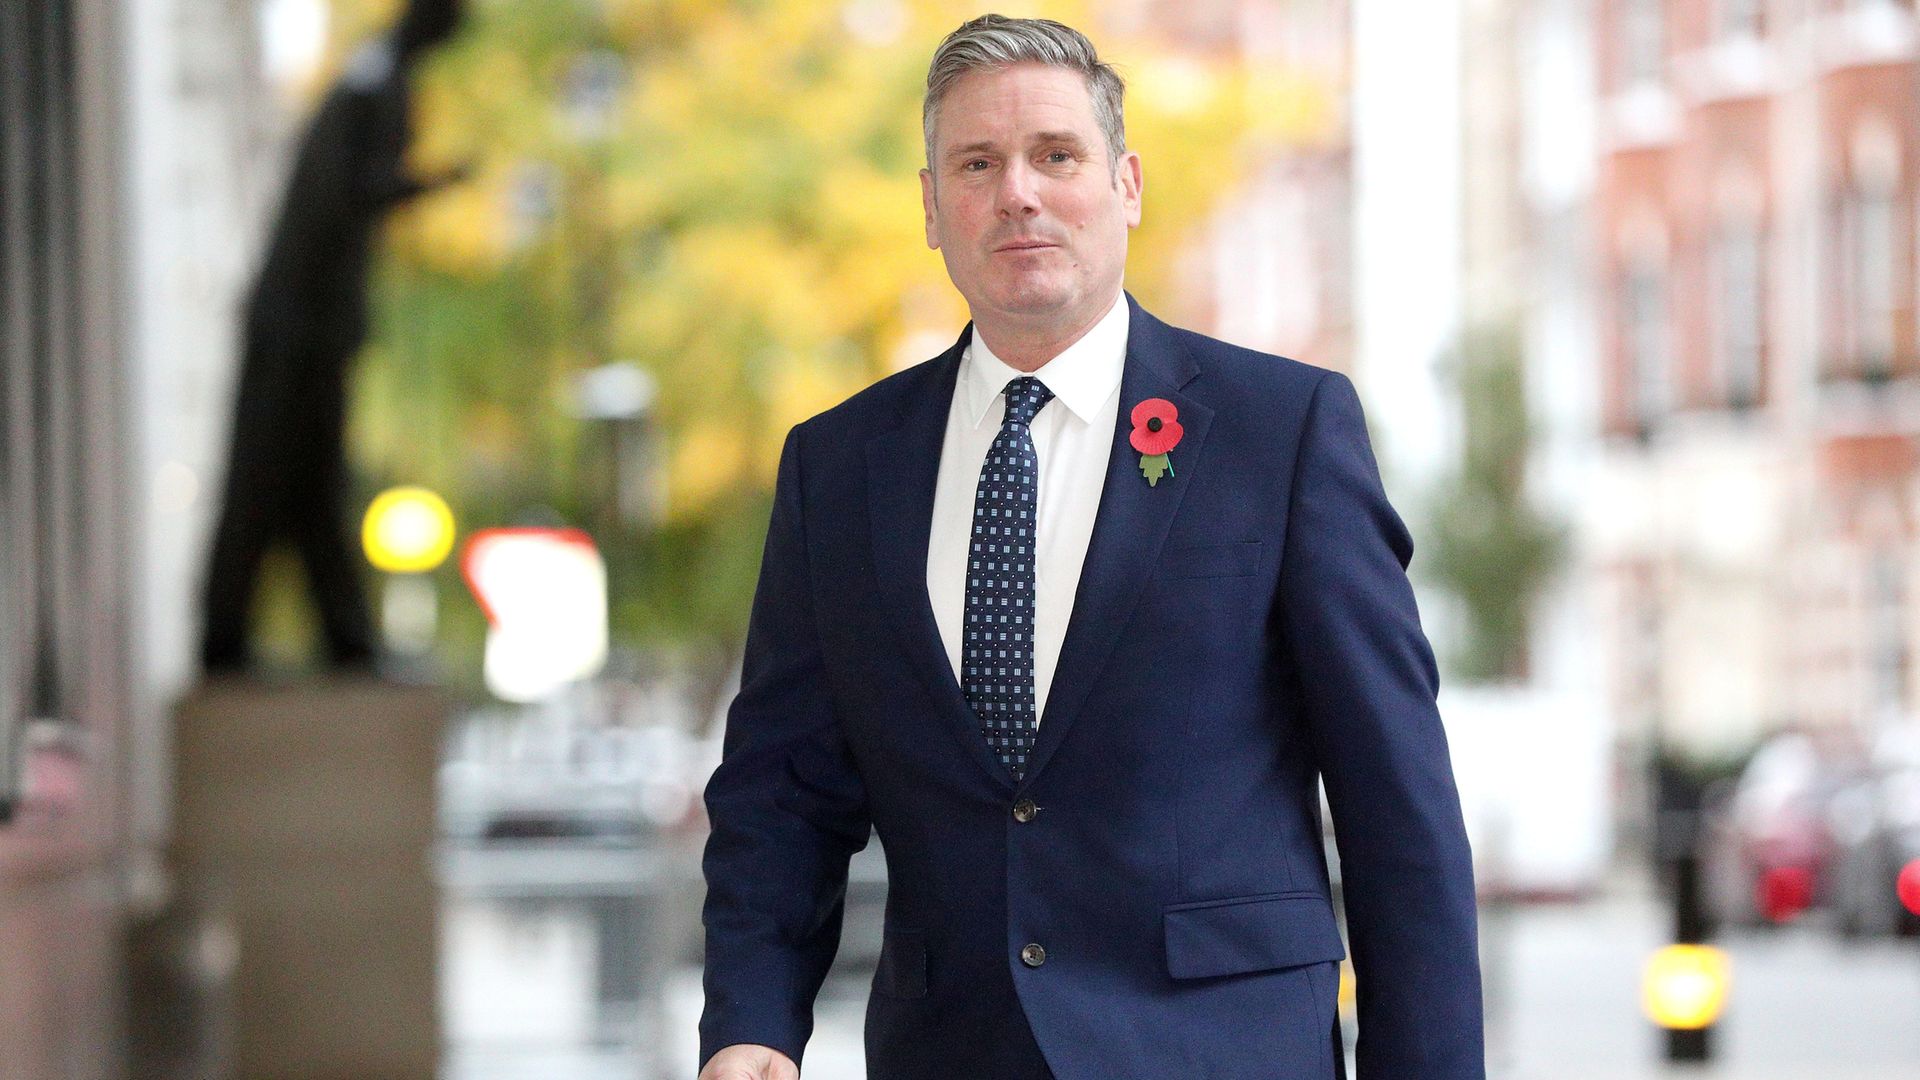 Labour Party leader Sir Keir Starmer arrives at BBC Broadcasting House in central London - Credit: PA